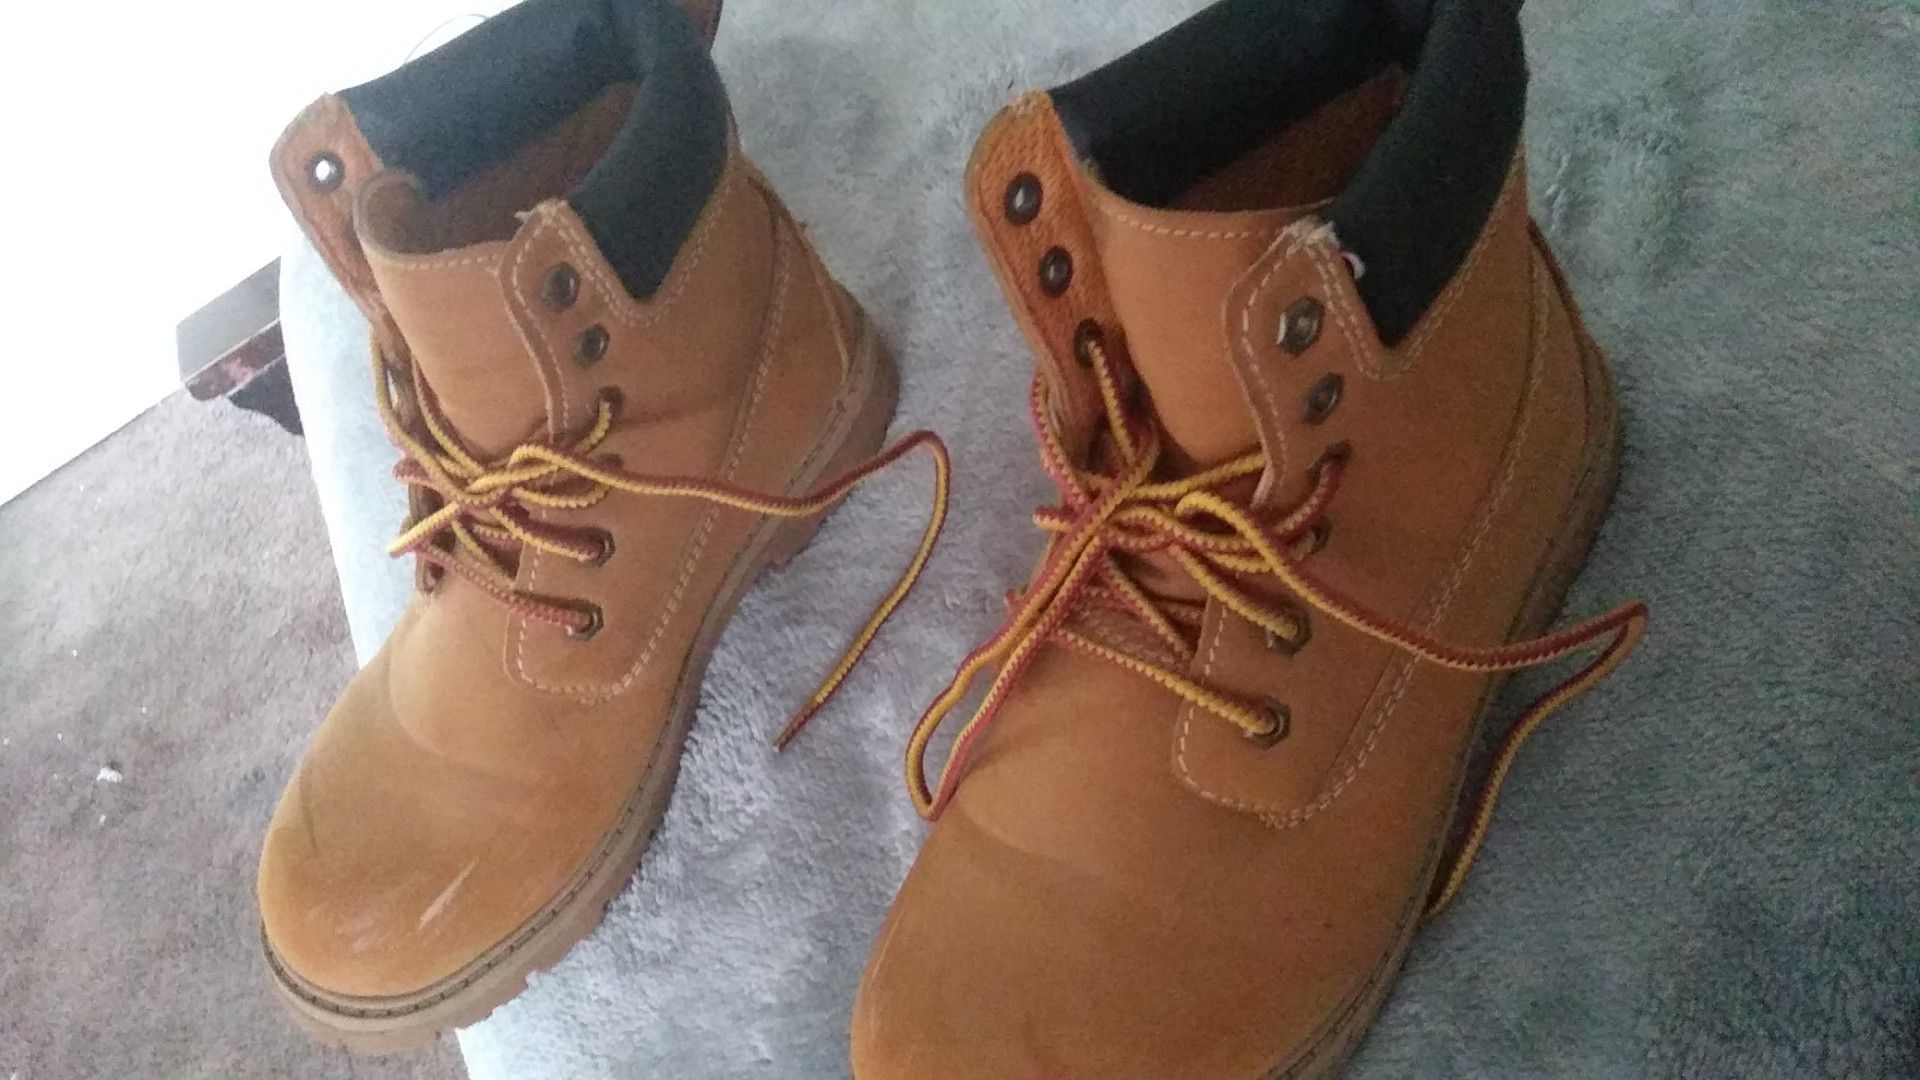 OZARK TRAIL SIZE #7 MENS WORK BOOTS IN MINT CONDITION ONLY 10$